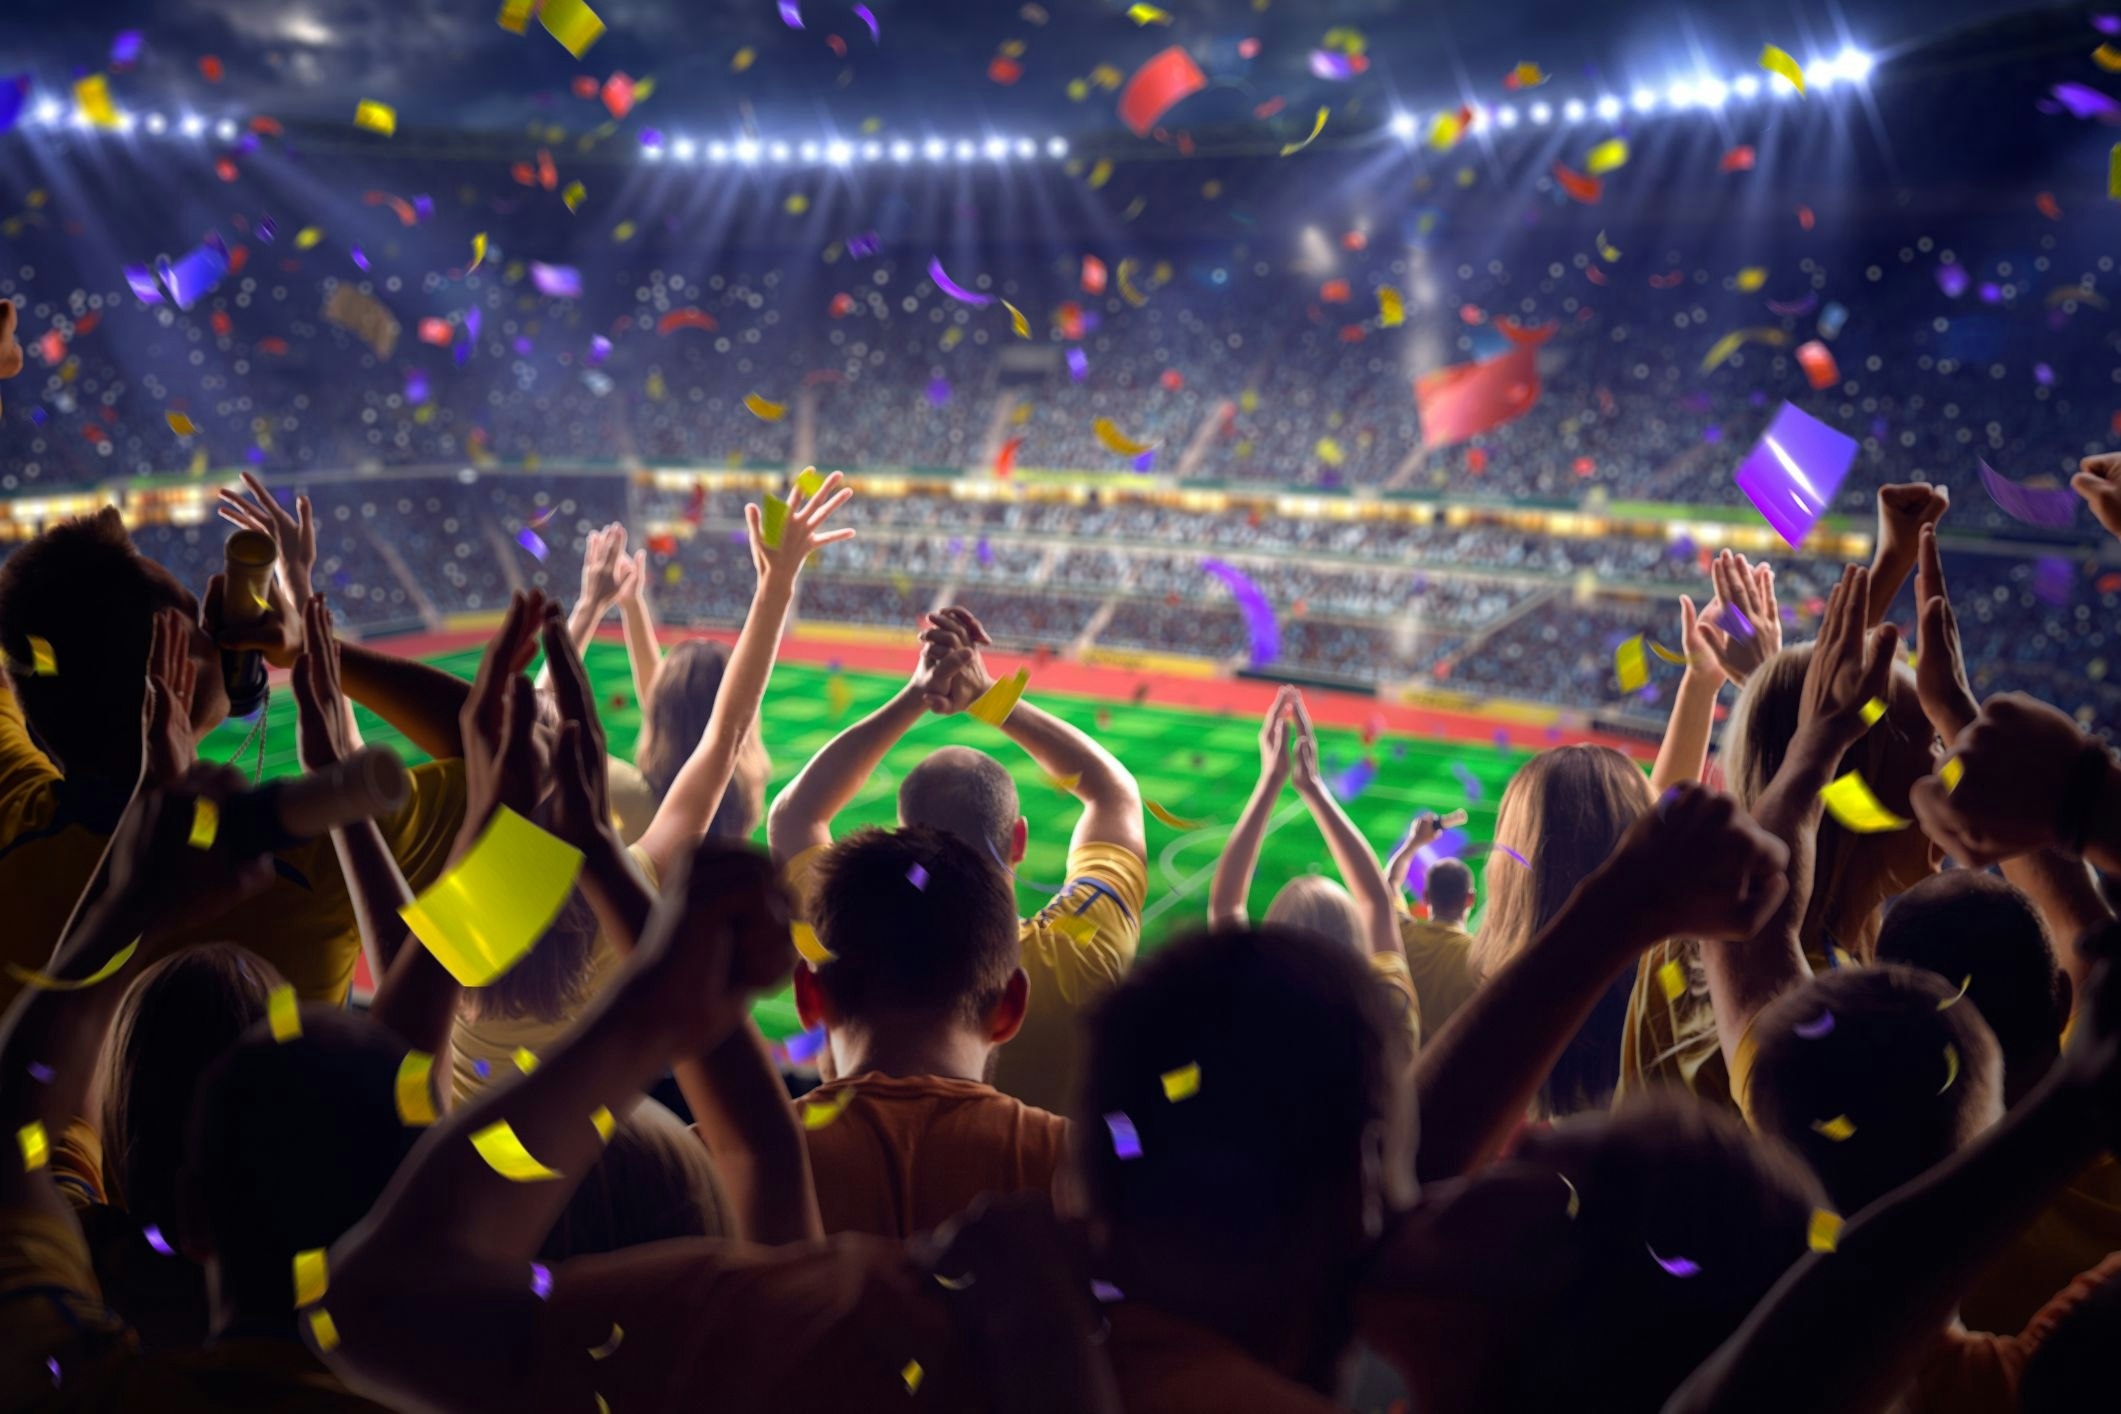 <p>Going to watch football is a great way to participate in Australian culture. [Source: Shutterstock]</p>
